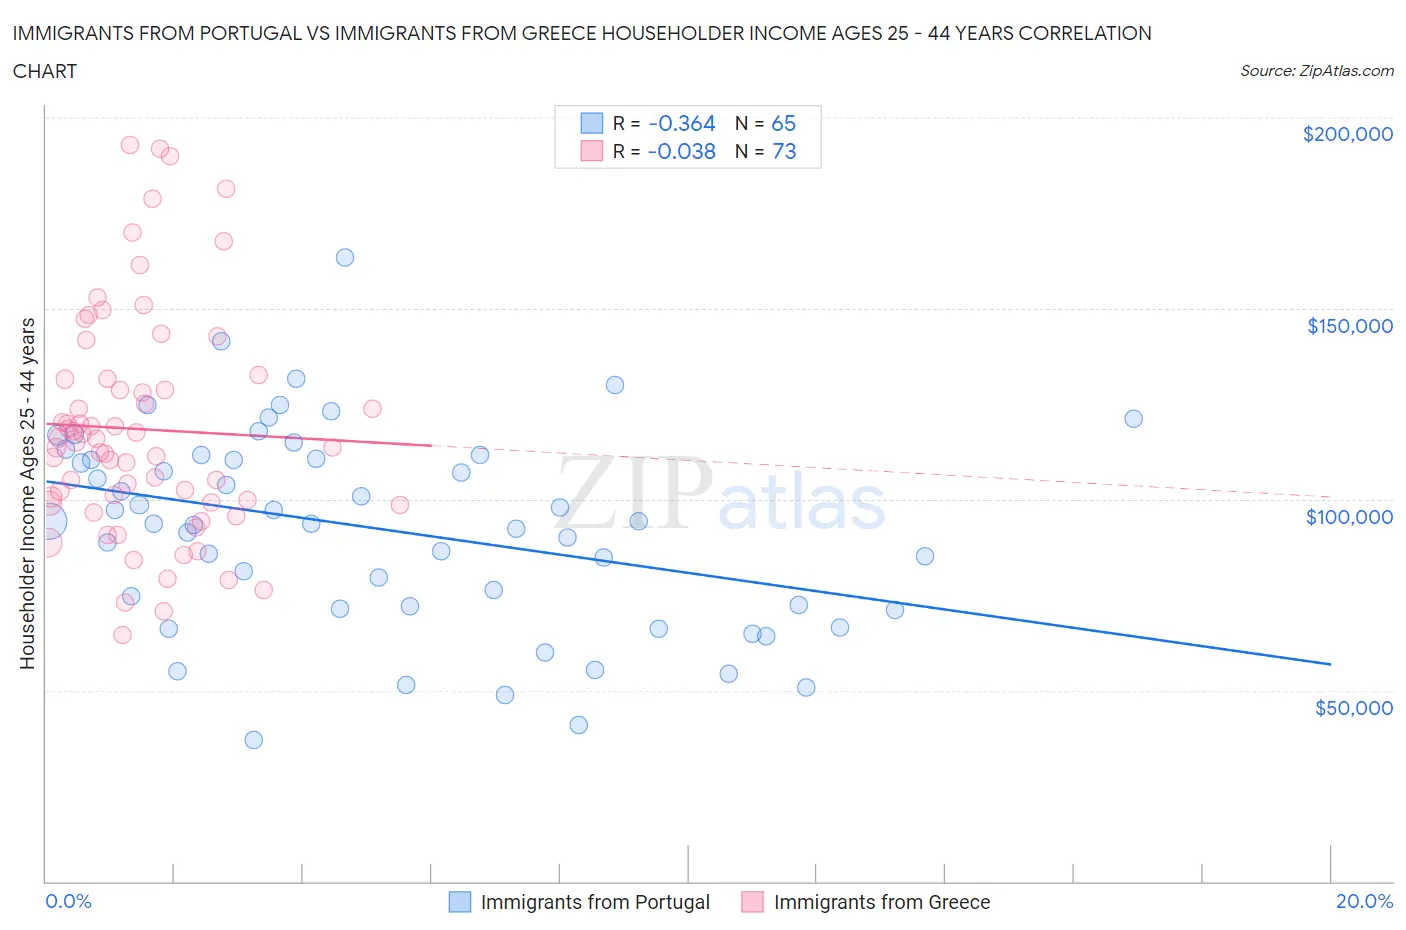 Immigrants from Portugal vs Immigrants from Greece Householder Income Ages 25 - 44 years